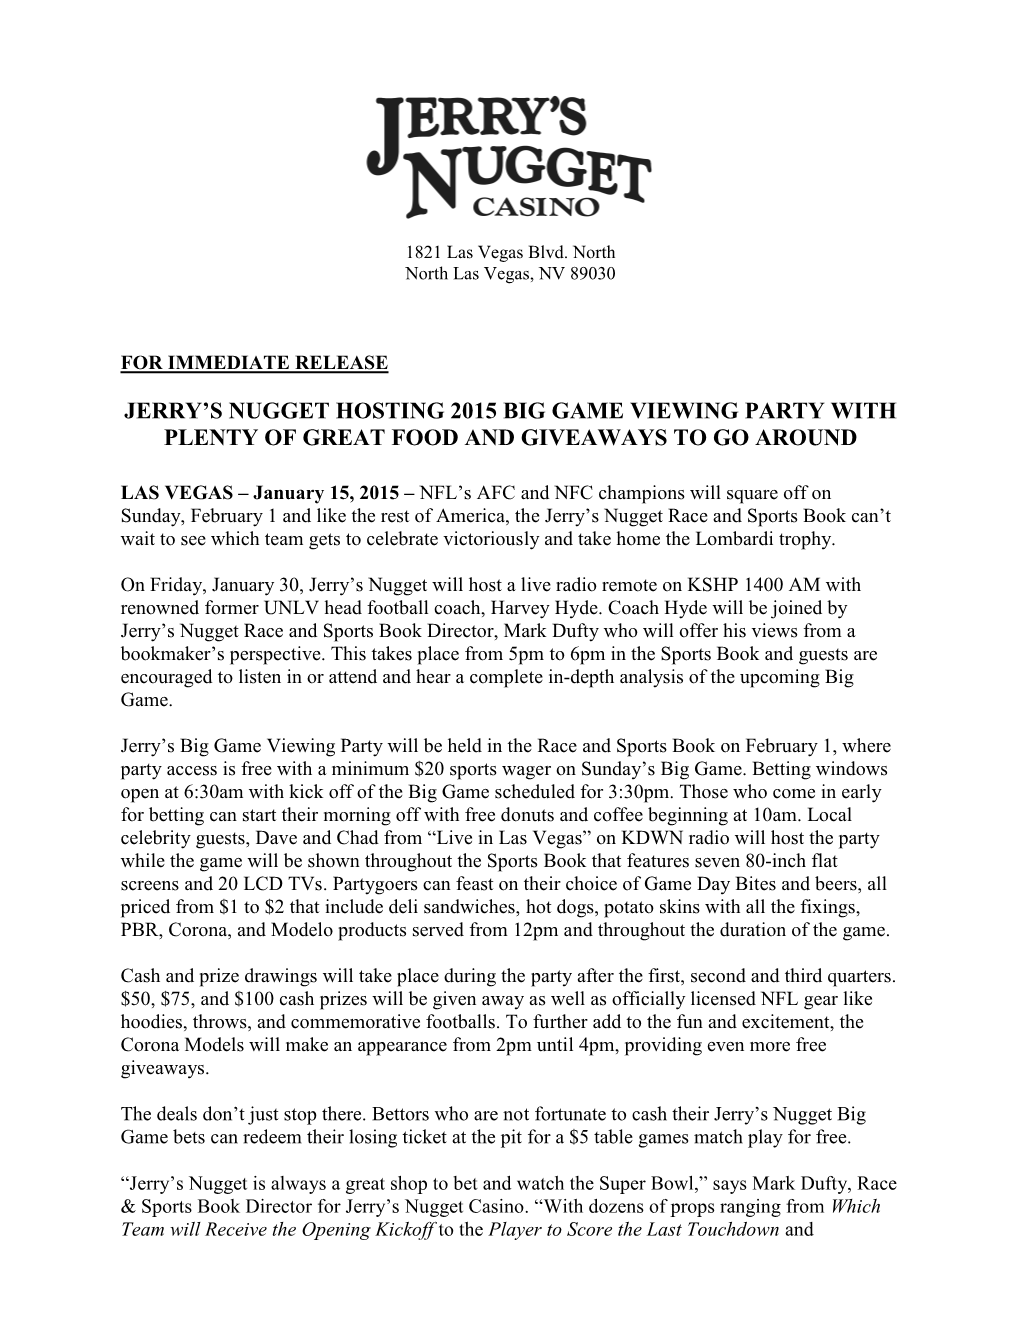 Jerry's Nugget Hosting 2015 Big Game Viewing Party With